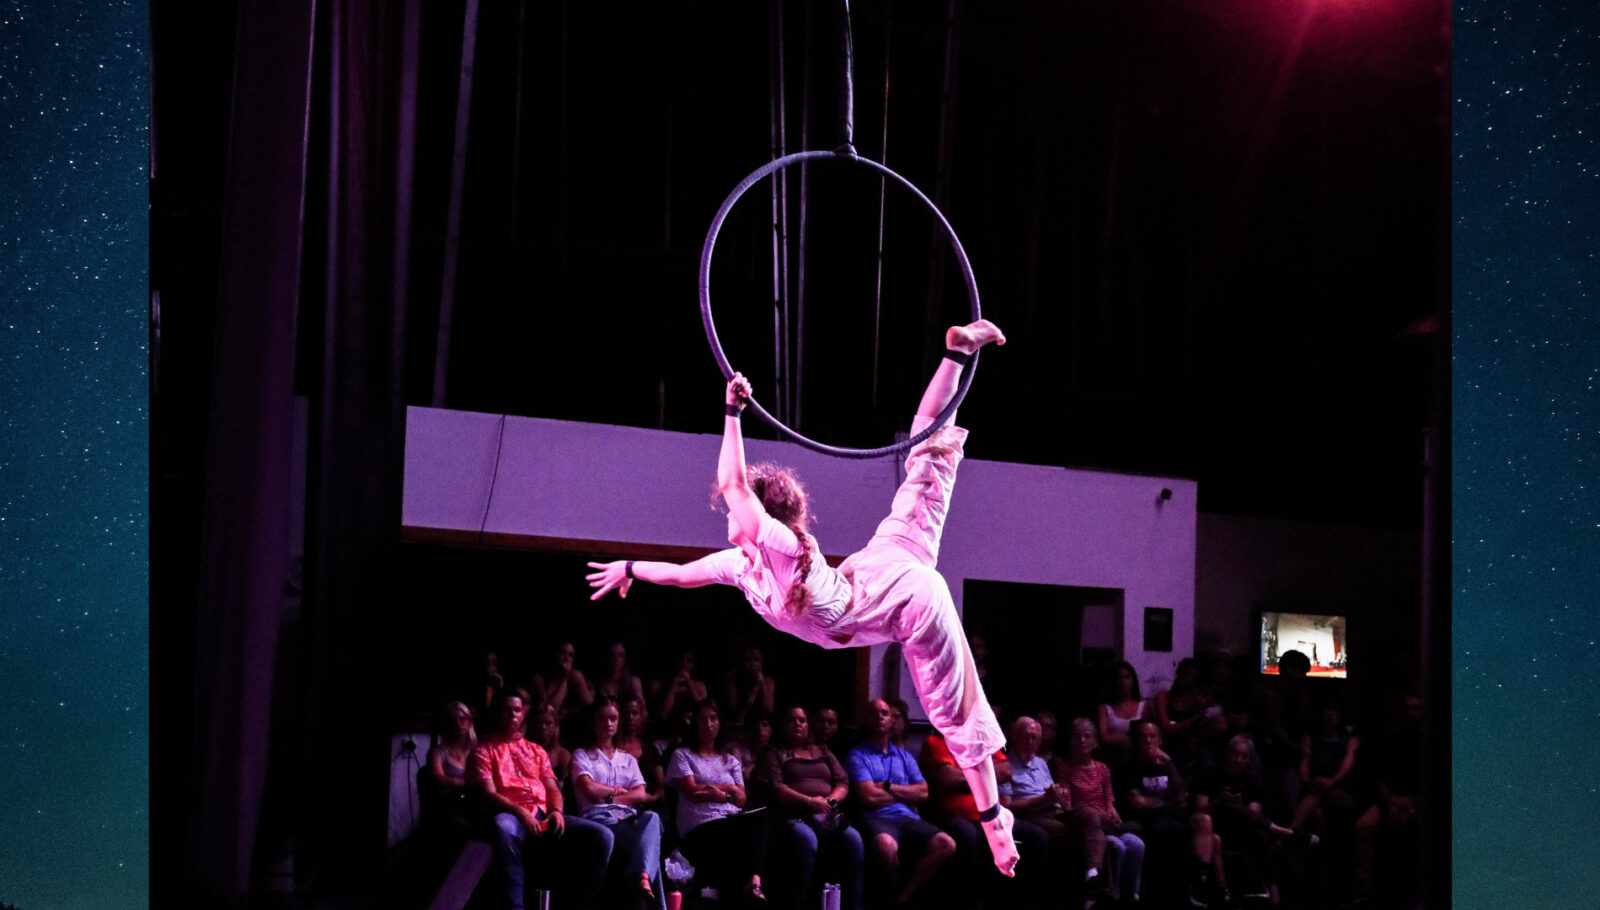 American female acrobat Veronika Agle reaching out to the crowd in her Lyra/aerial hoop routine at San Diego Circus Festival 2023